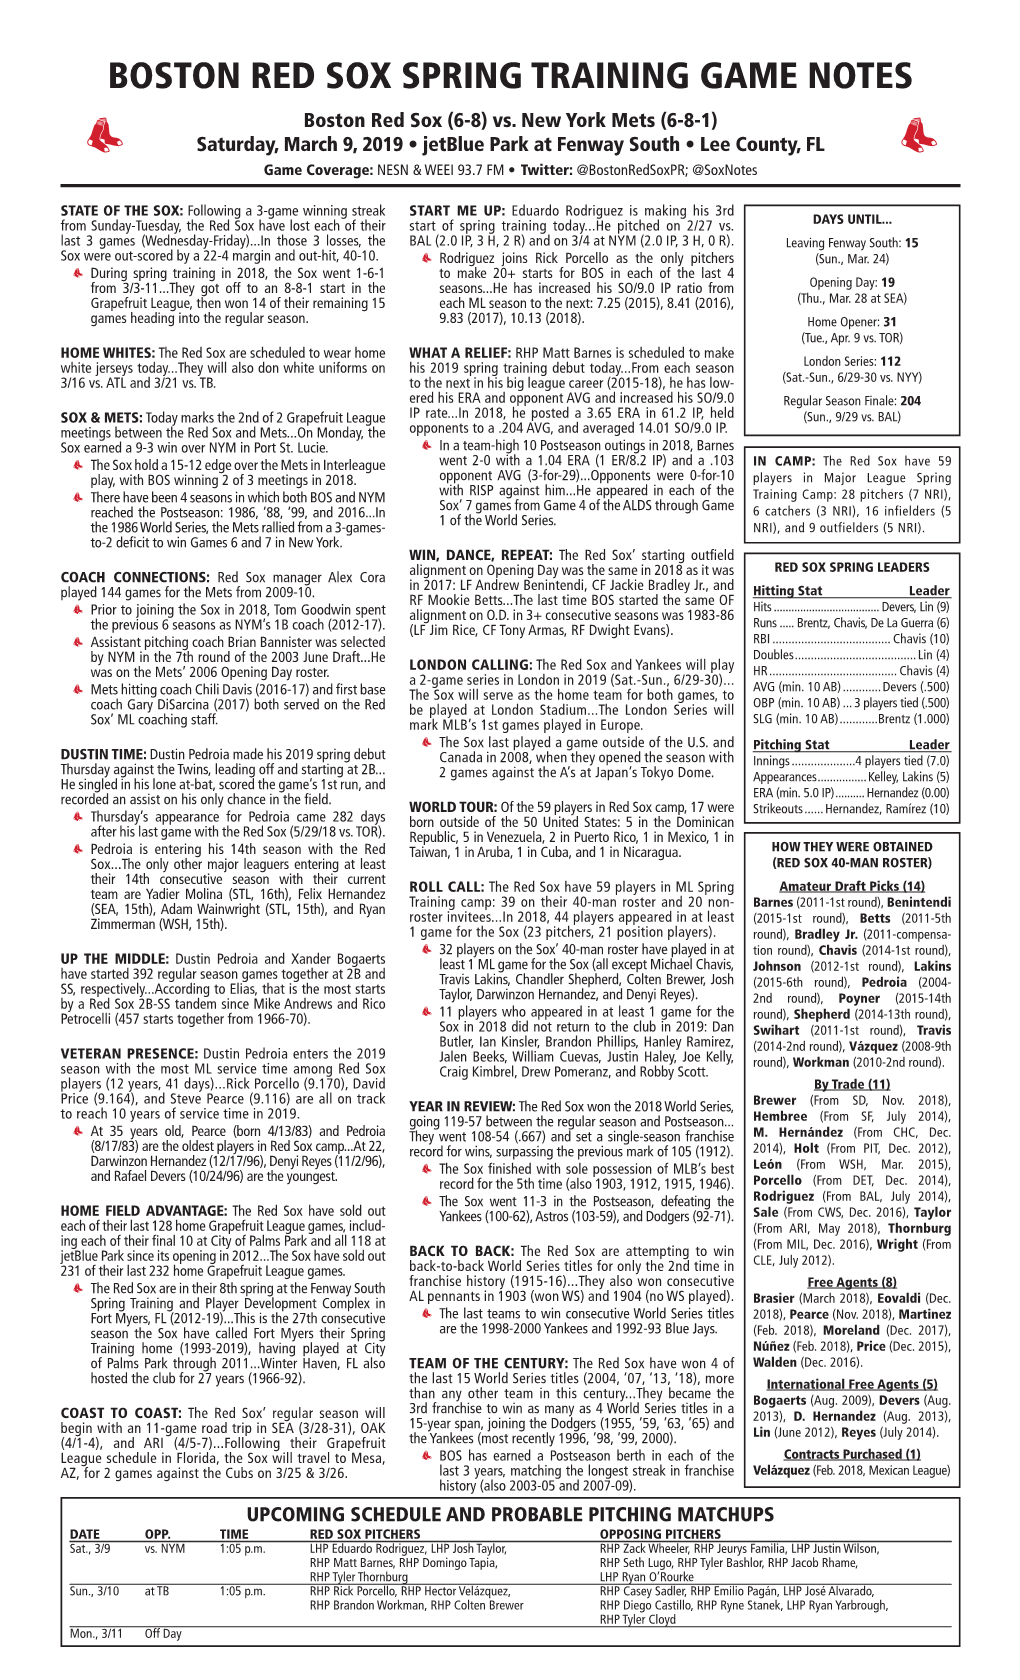 BOSTON RED SOX SPRING TRAINING GAME NOTES Boston Red Sox (6-8) Vs